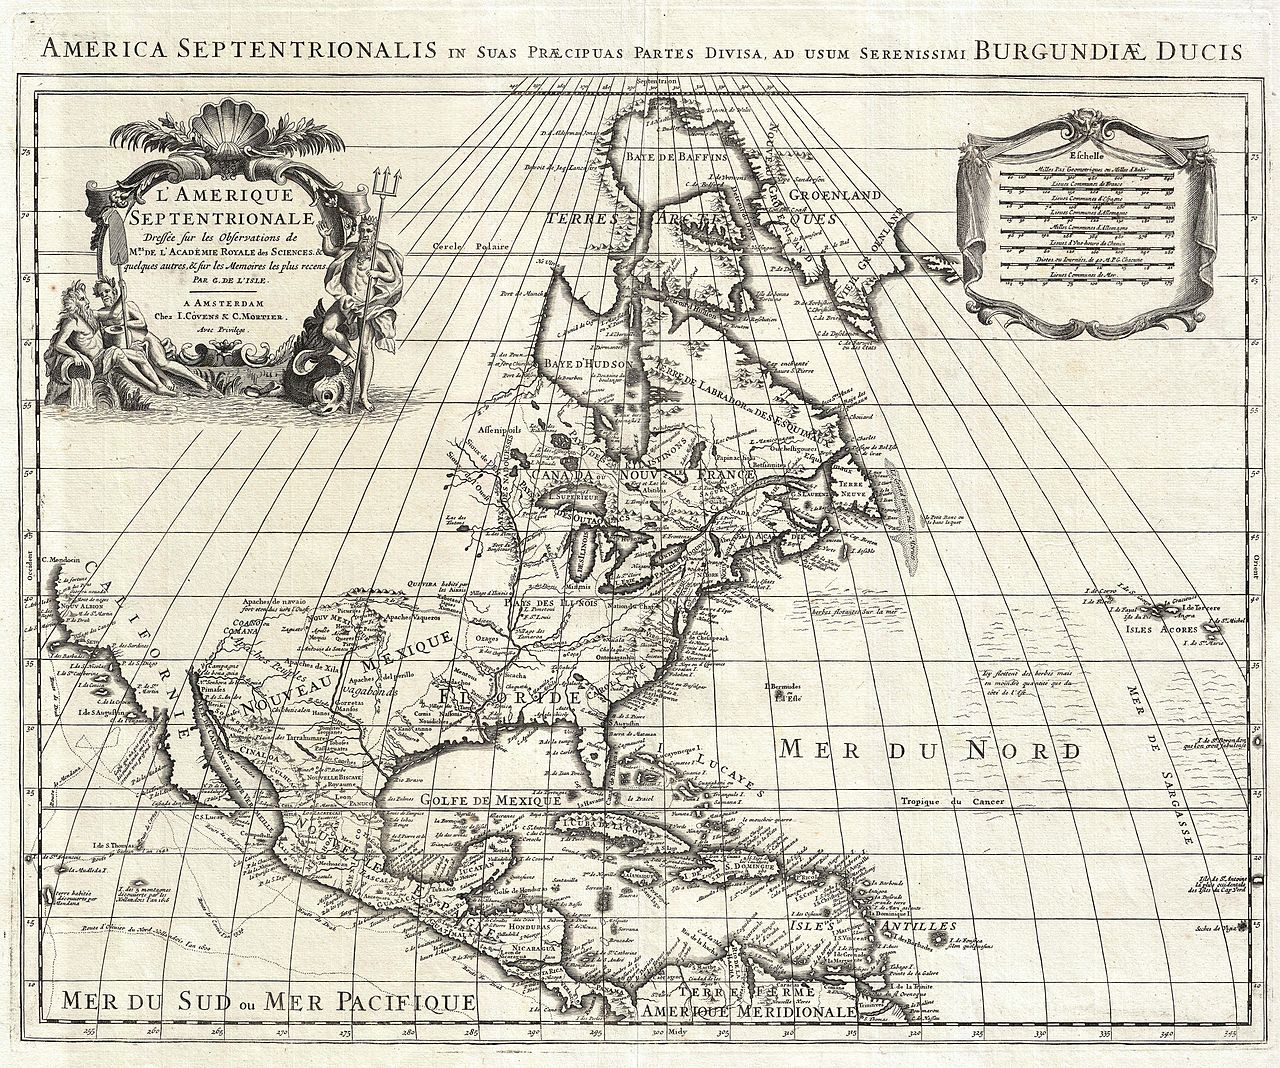 1700 map by Guillaume De L'Isle of North America, reissued by Covens and Mortier in 1708